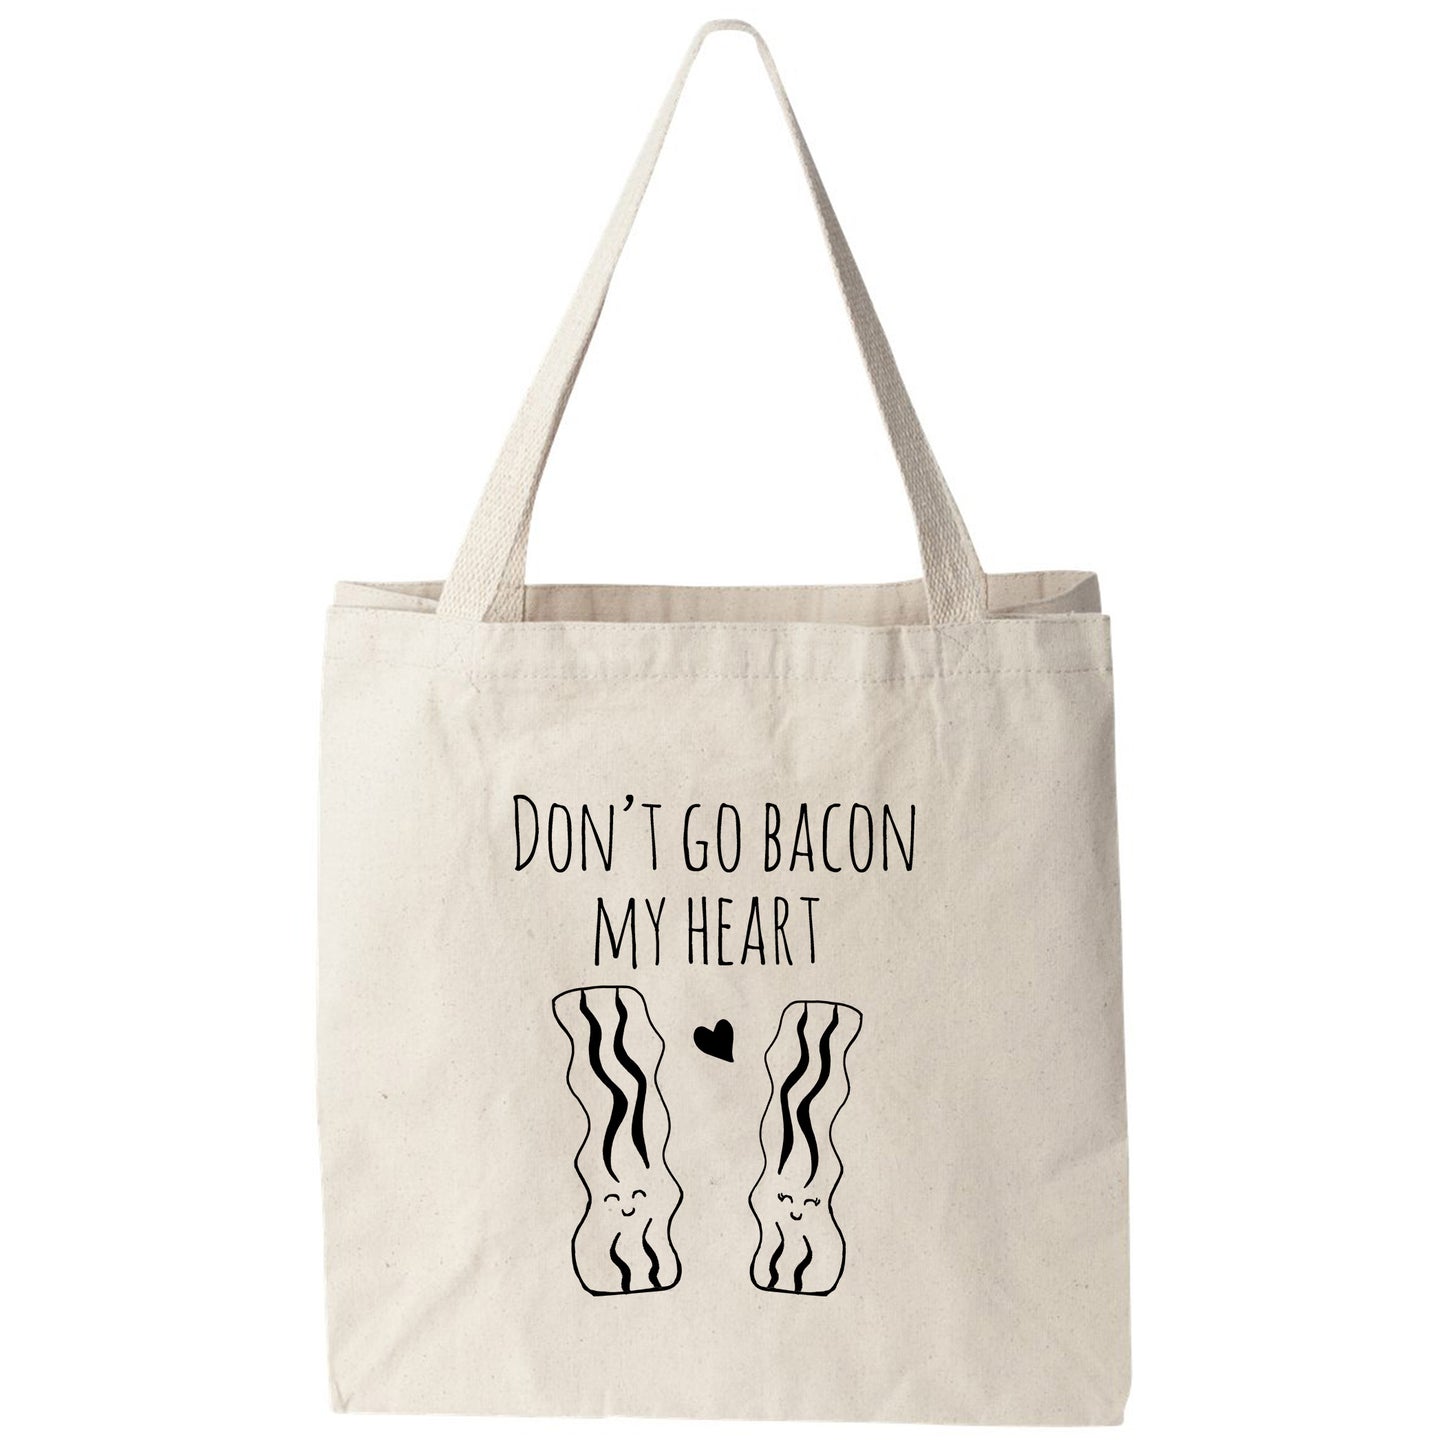 a tote bag that says don't go bacon my heart